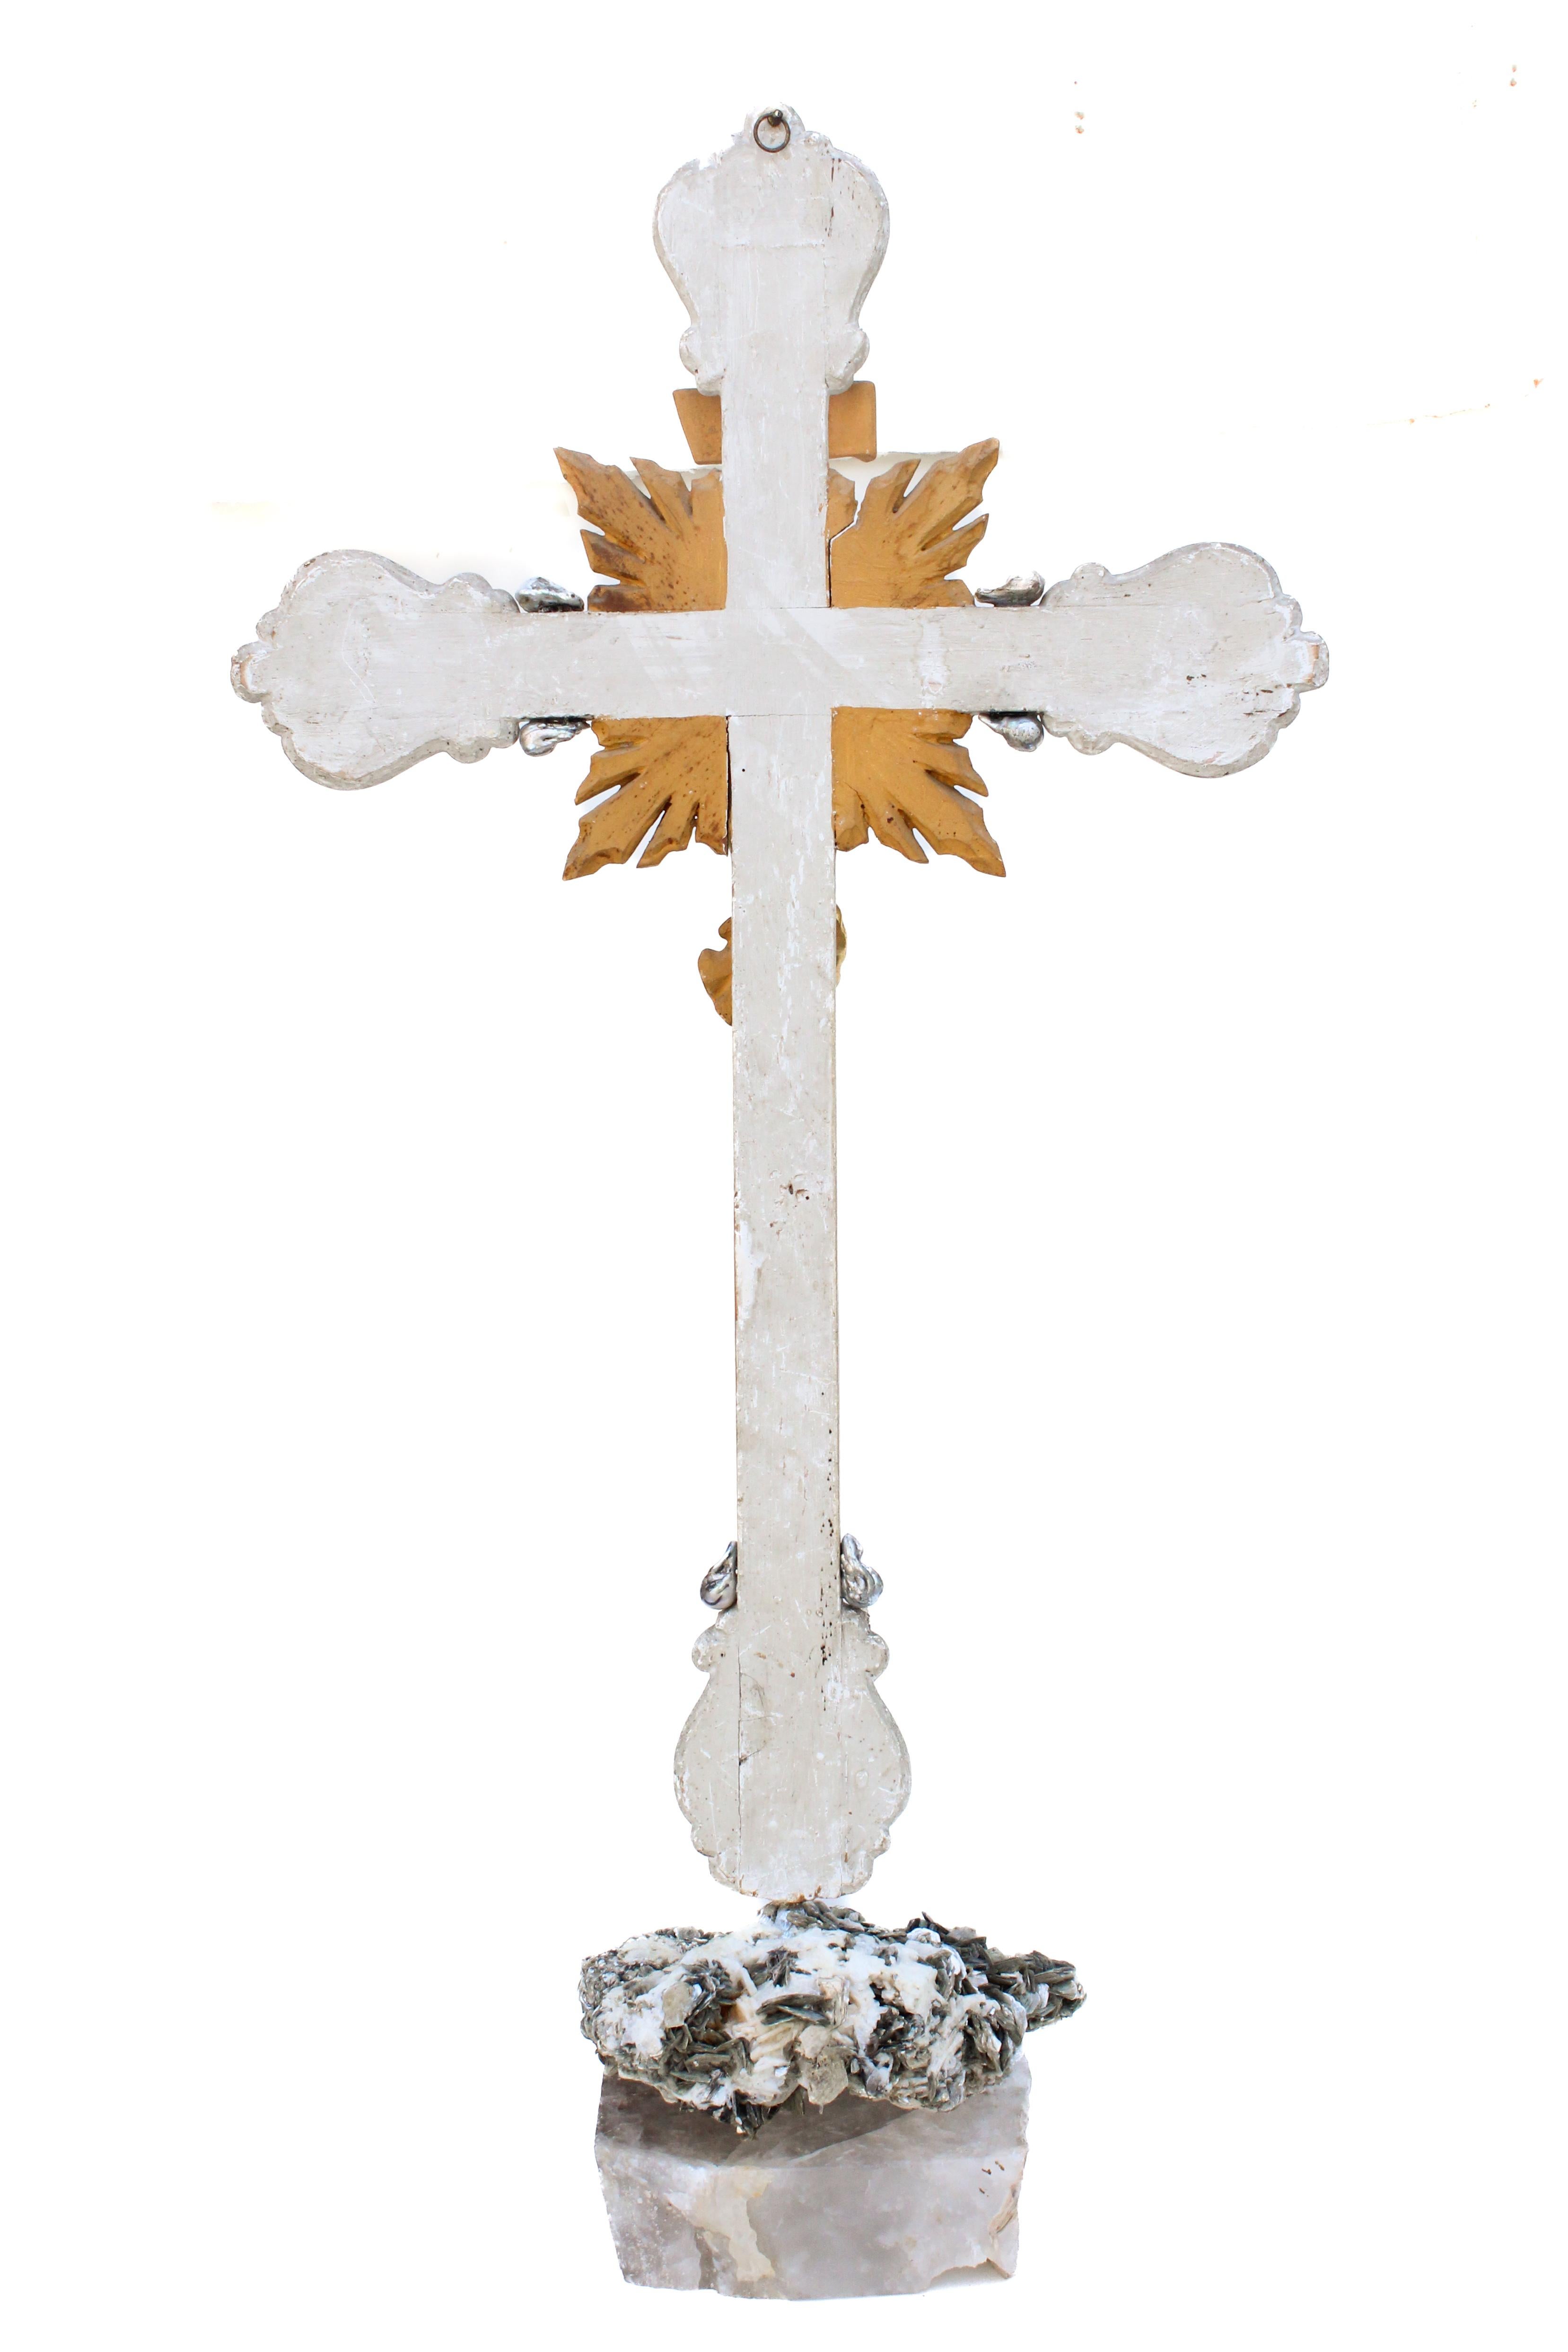 18th Century Italian Silver and Gold Crucifix with Mica and Calcite Crystal In Good Condition For Sale In Dublin, Dalkey